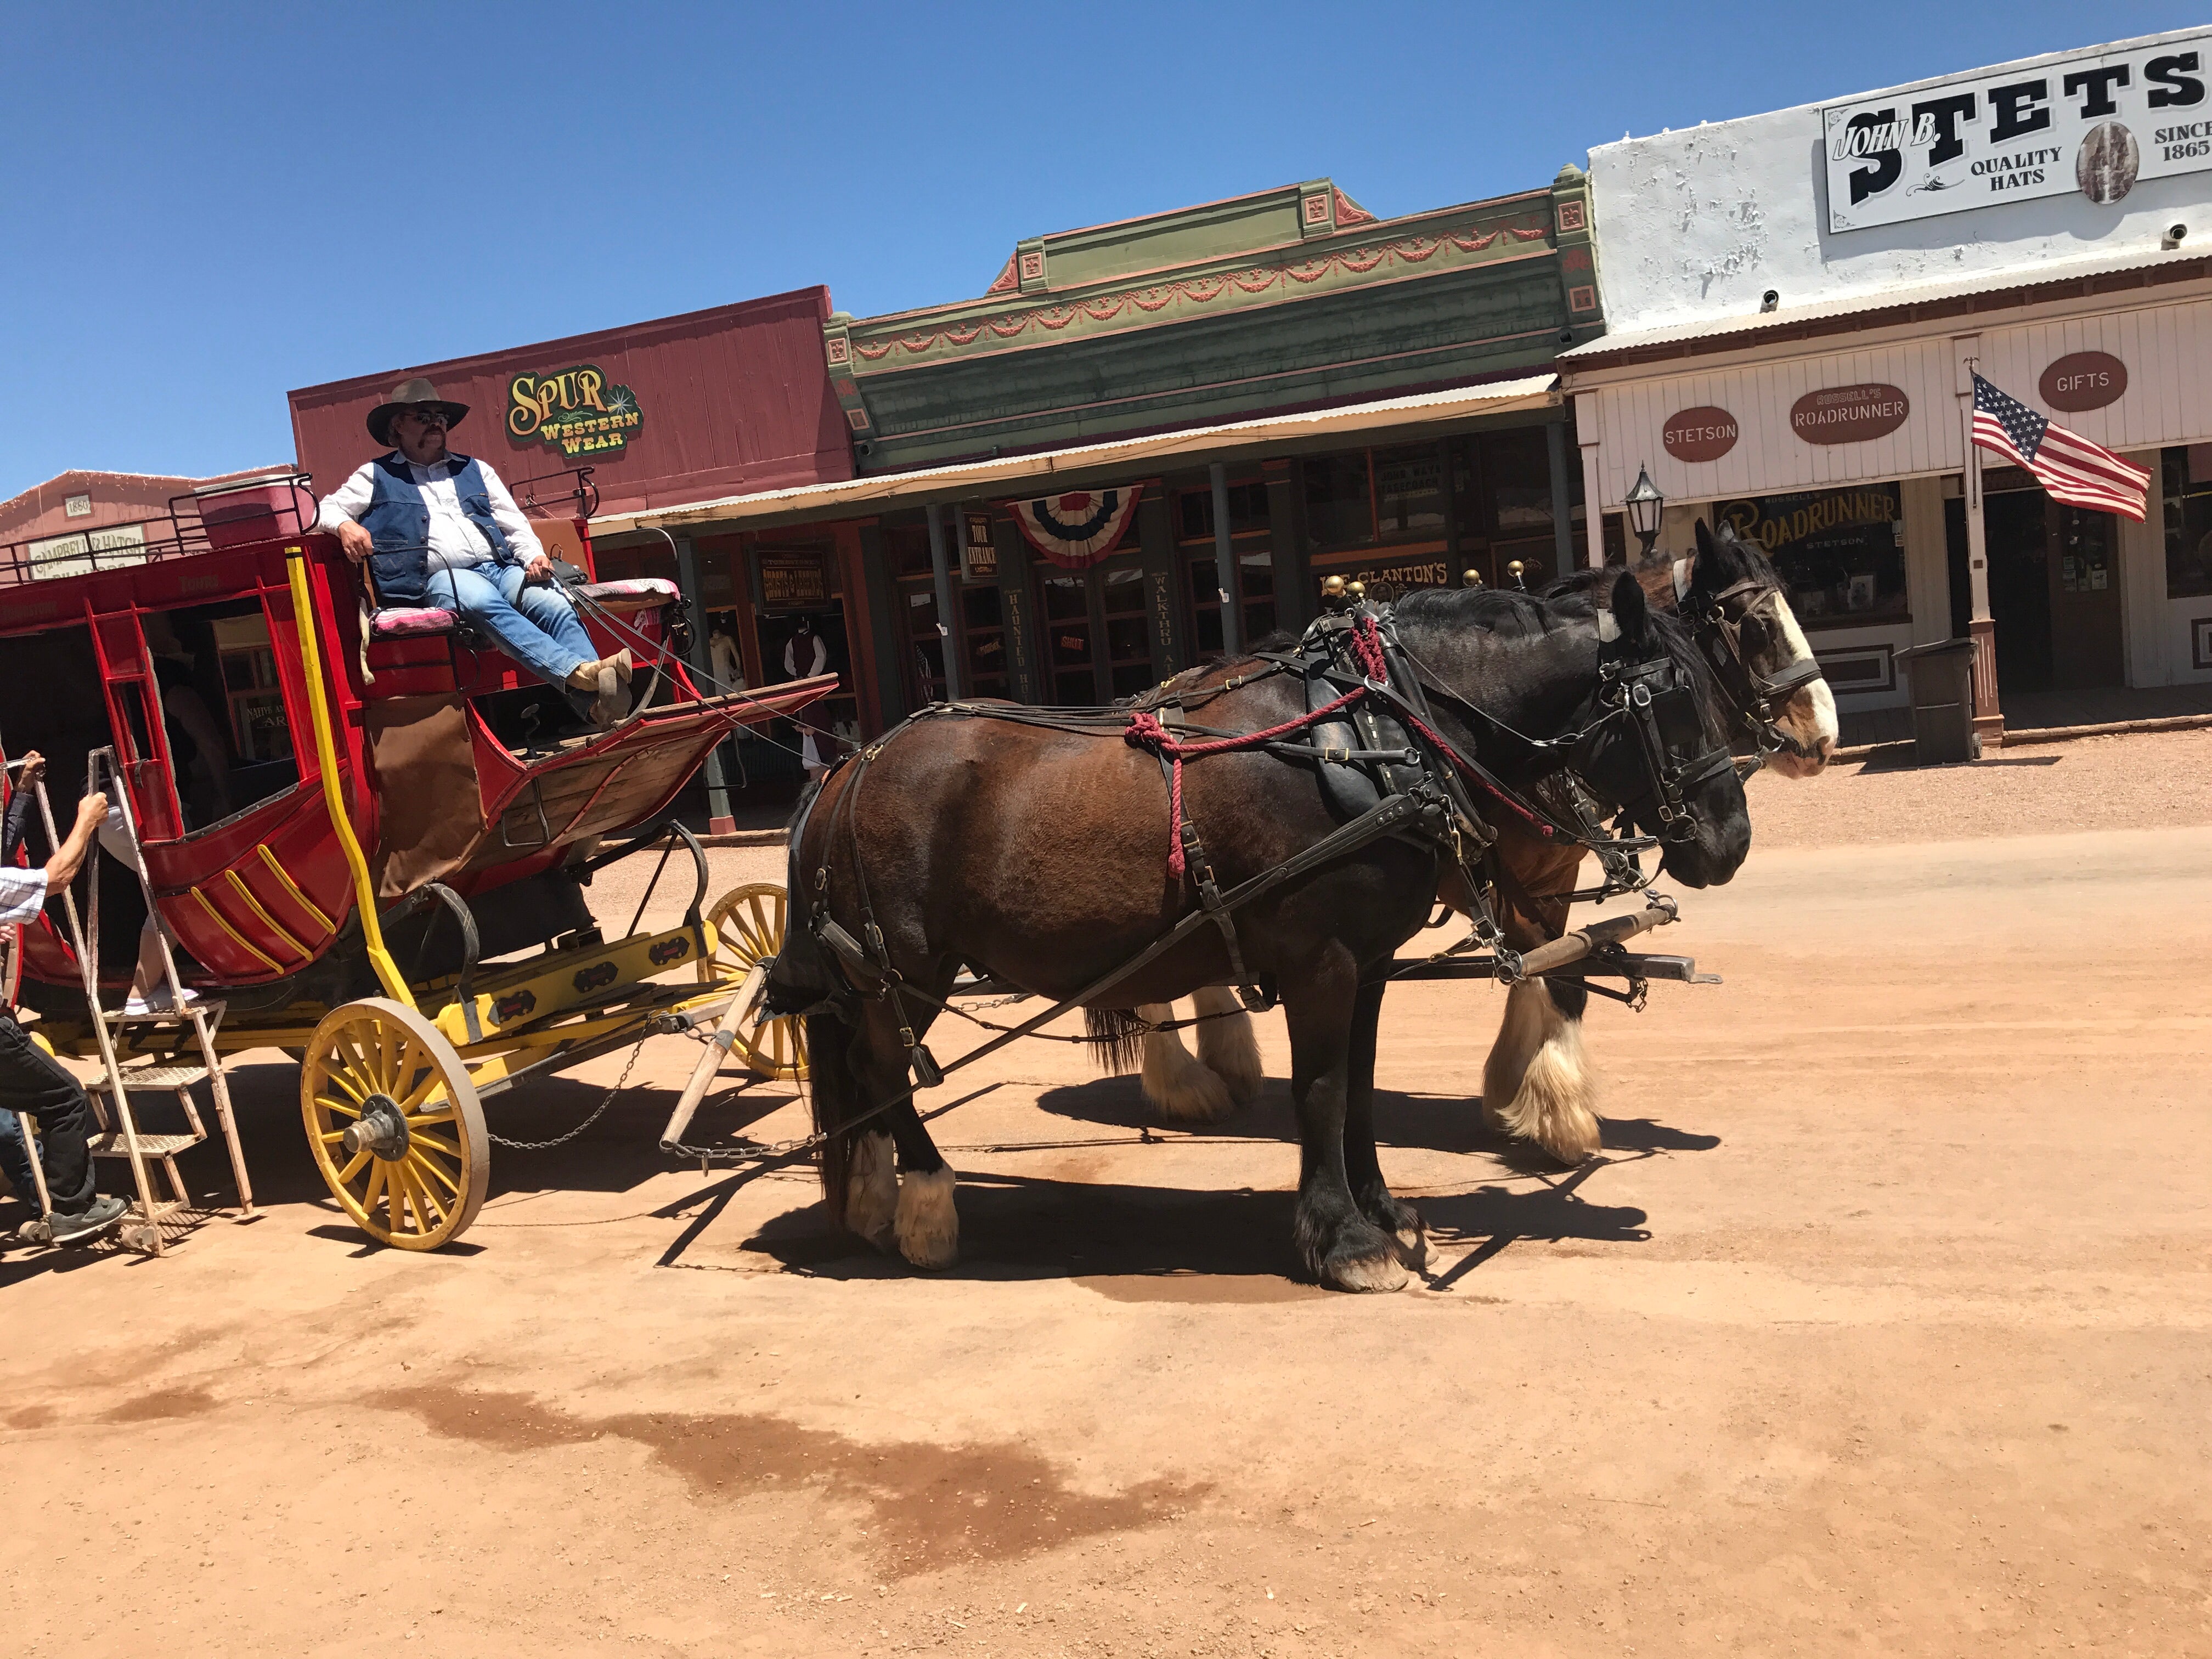 Through many of the downtown streets along the boardwalk areas you cannot drive and instead you will only see the stagecoaches and horses which will take you back.   Our shuttle dropped us off just around the corner from the stagecoach pick up area.  